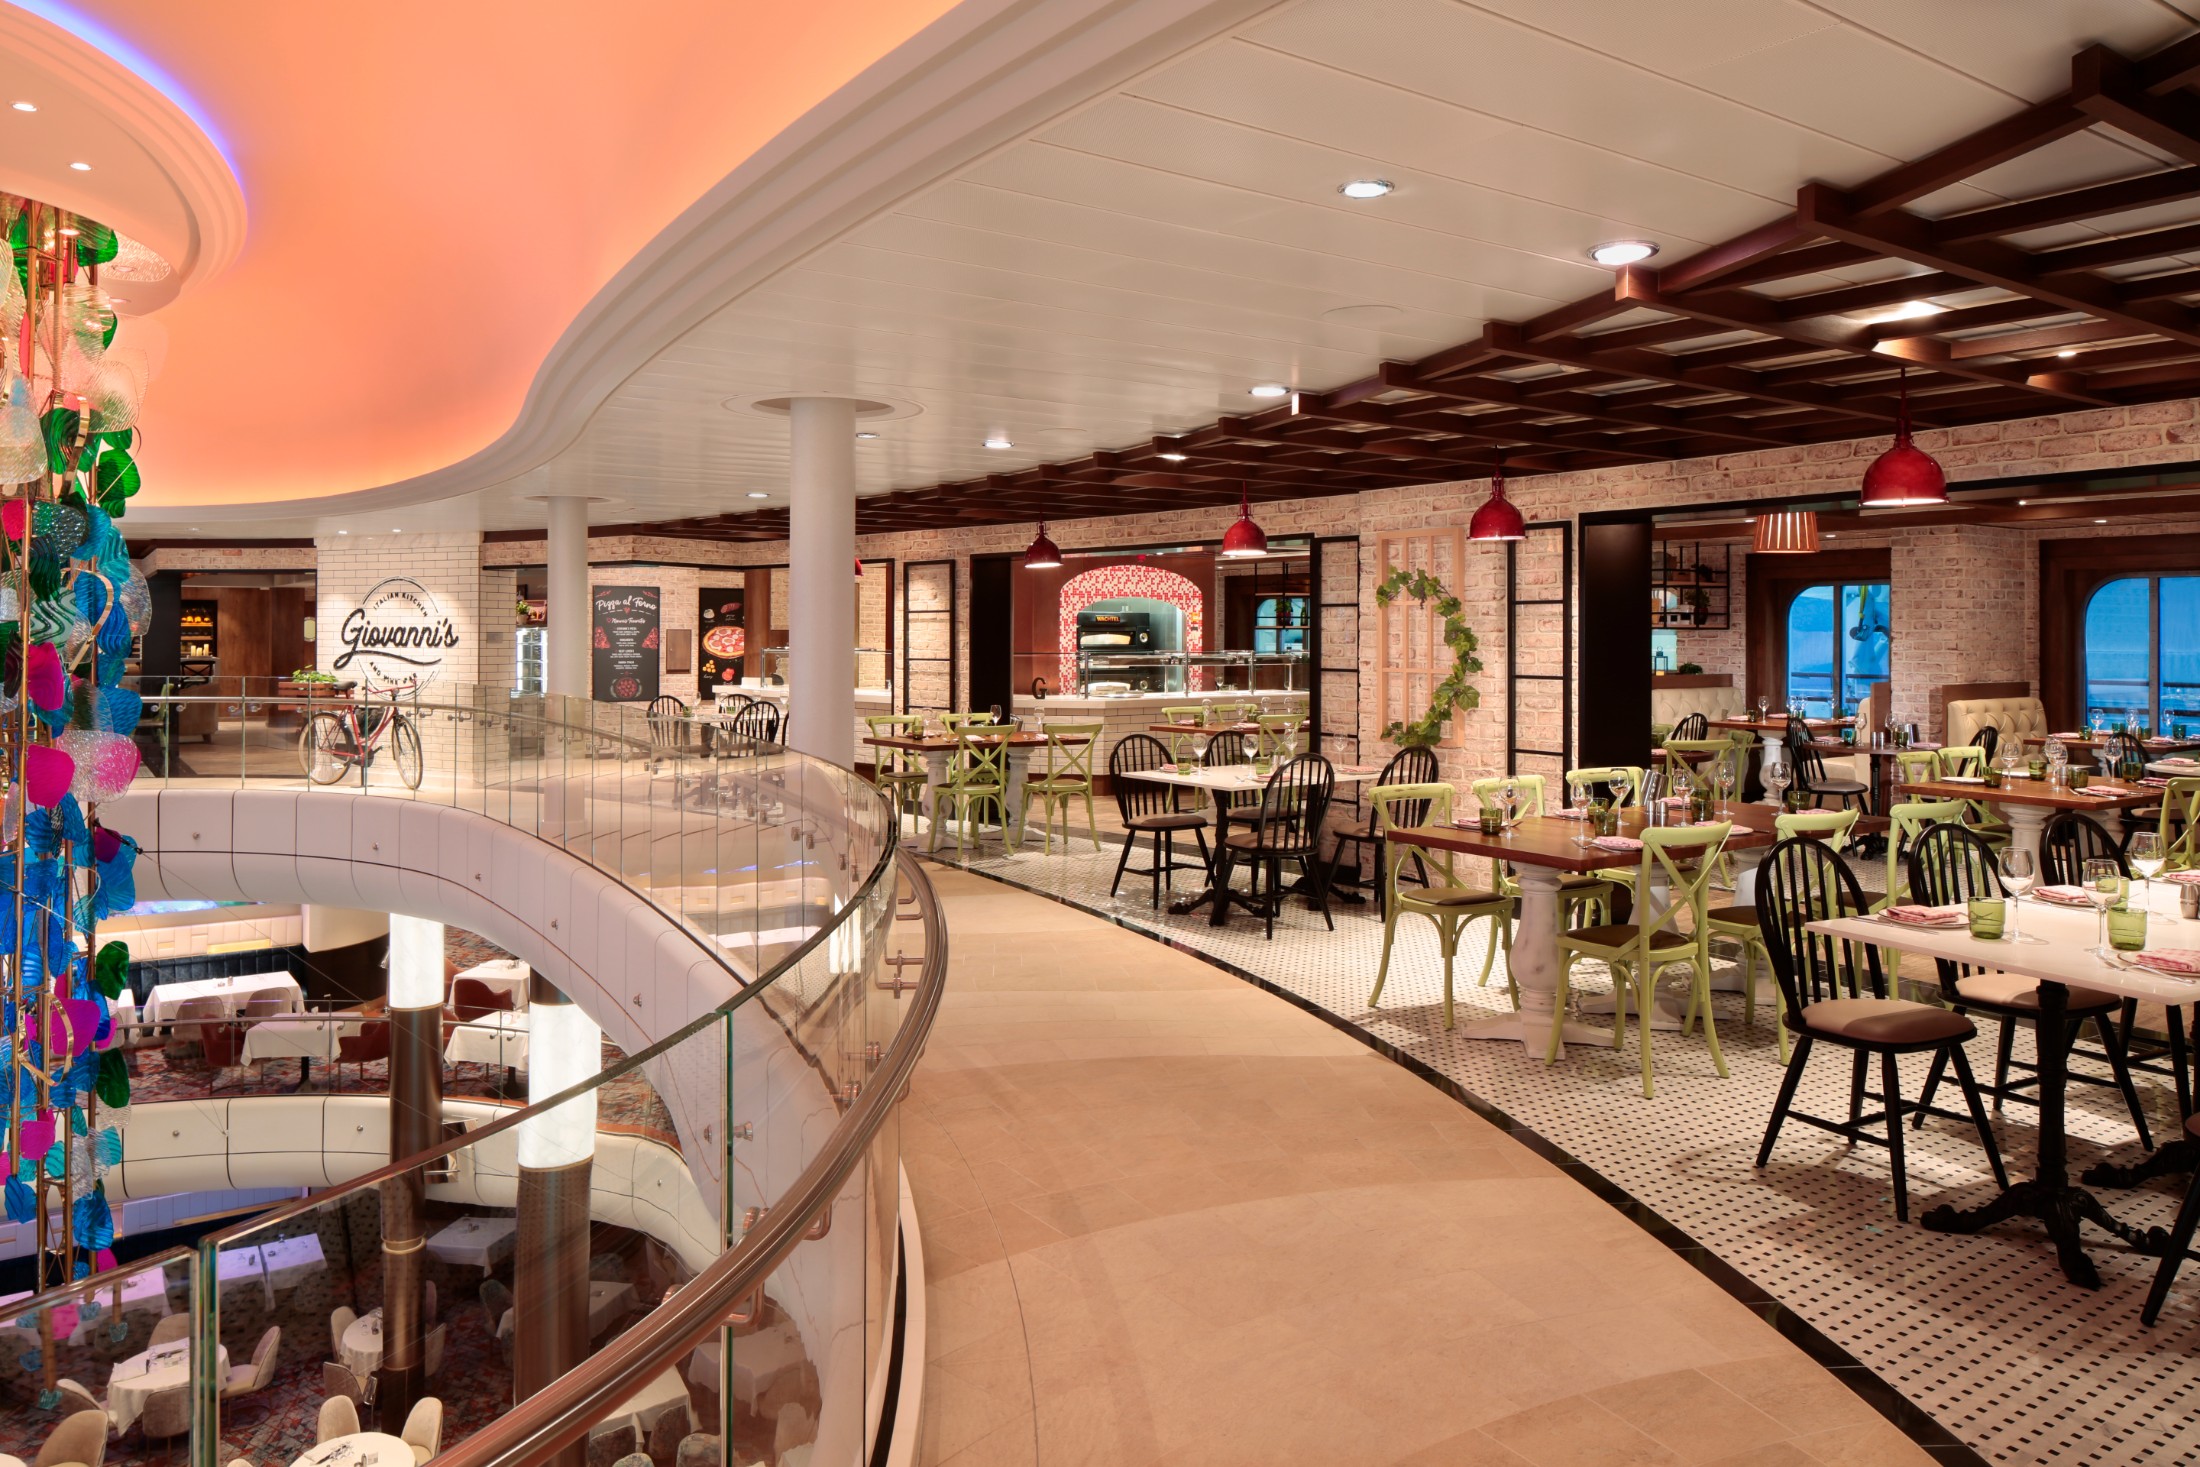 Giovanni’s Italian Kitchen & Wine Bar debuts on board Odyssey of the Seas. The authentic, family-style dining experience serves up a menu of favorites – like an array of handcrafted pizzas, charcuterie boards and pastas – as many as 50 wines by the glass and classic Italian cocktails with a twist, including a negroni and aperol spritz.